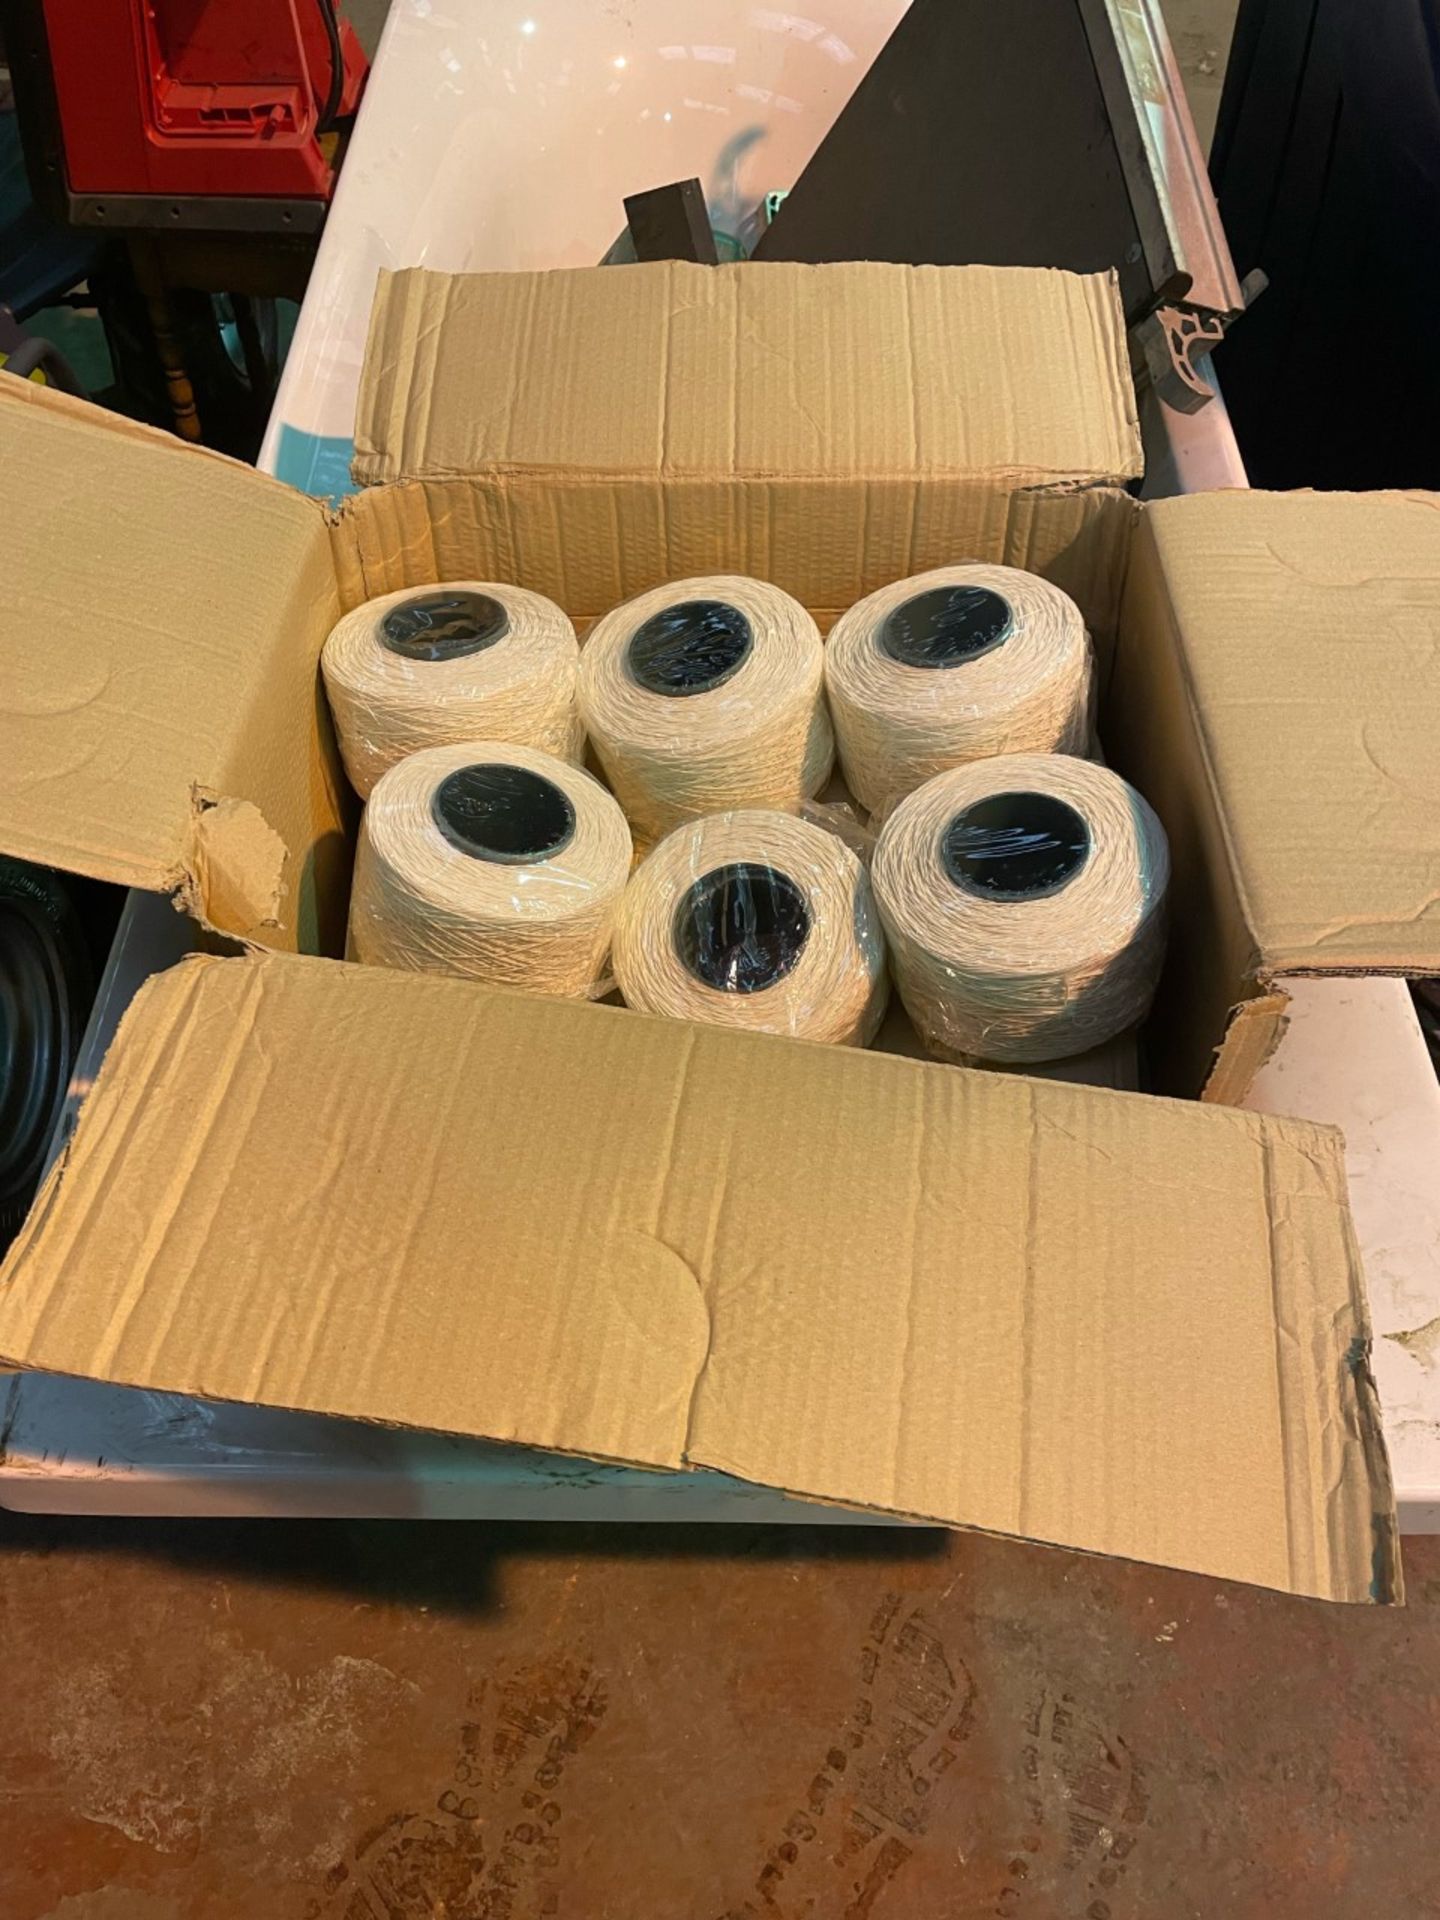 1 new box of white string rolls. 12 rolls in total